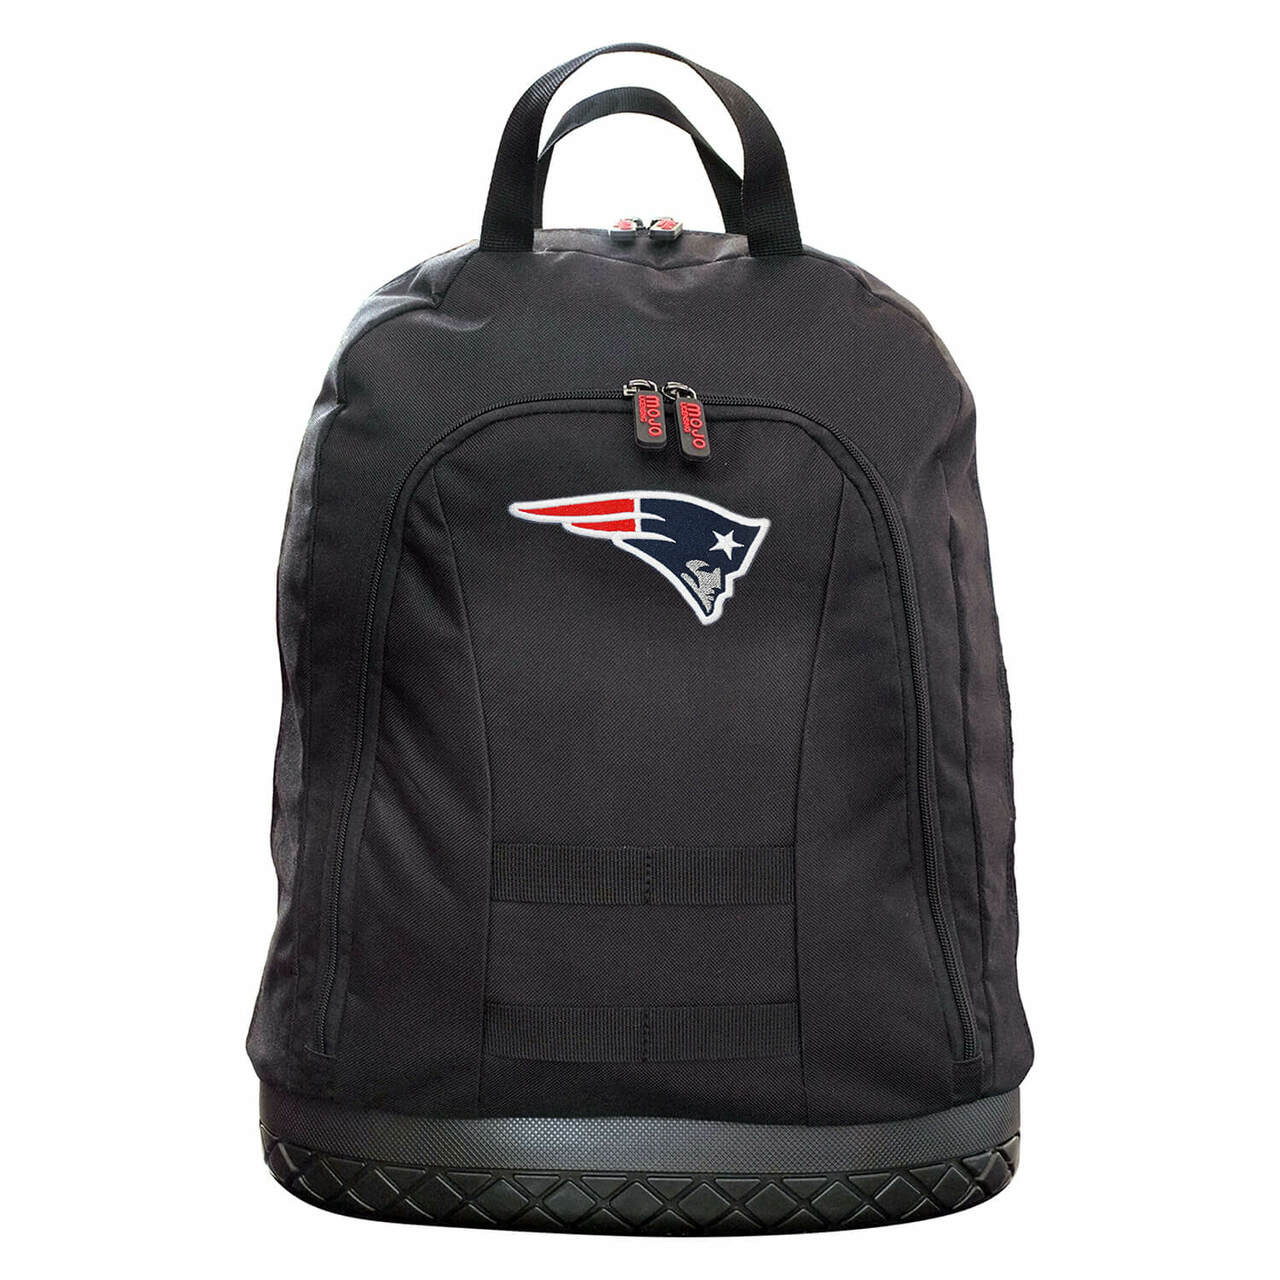 New England Patriots Backpack Toolbag